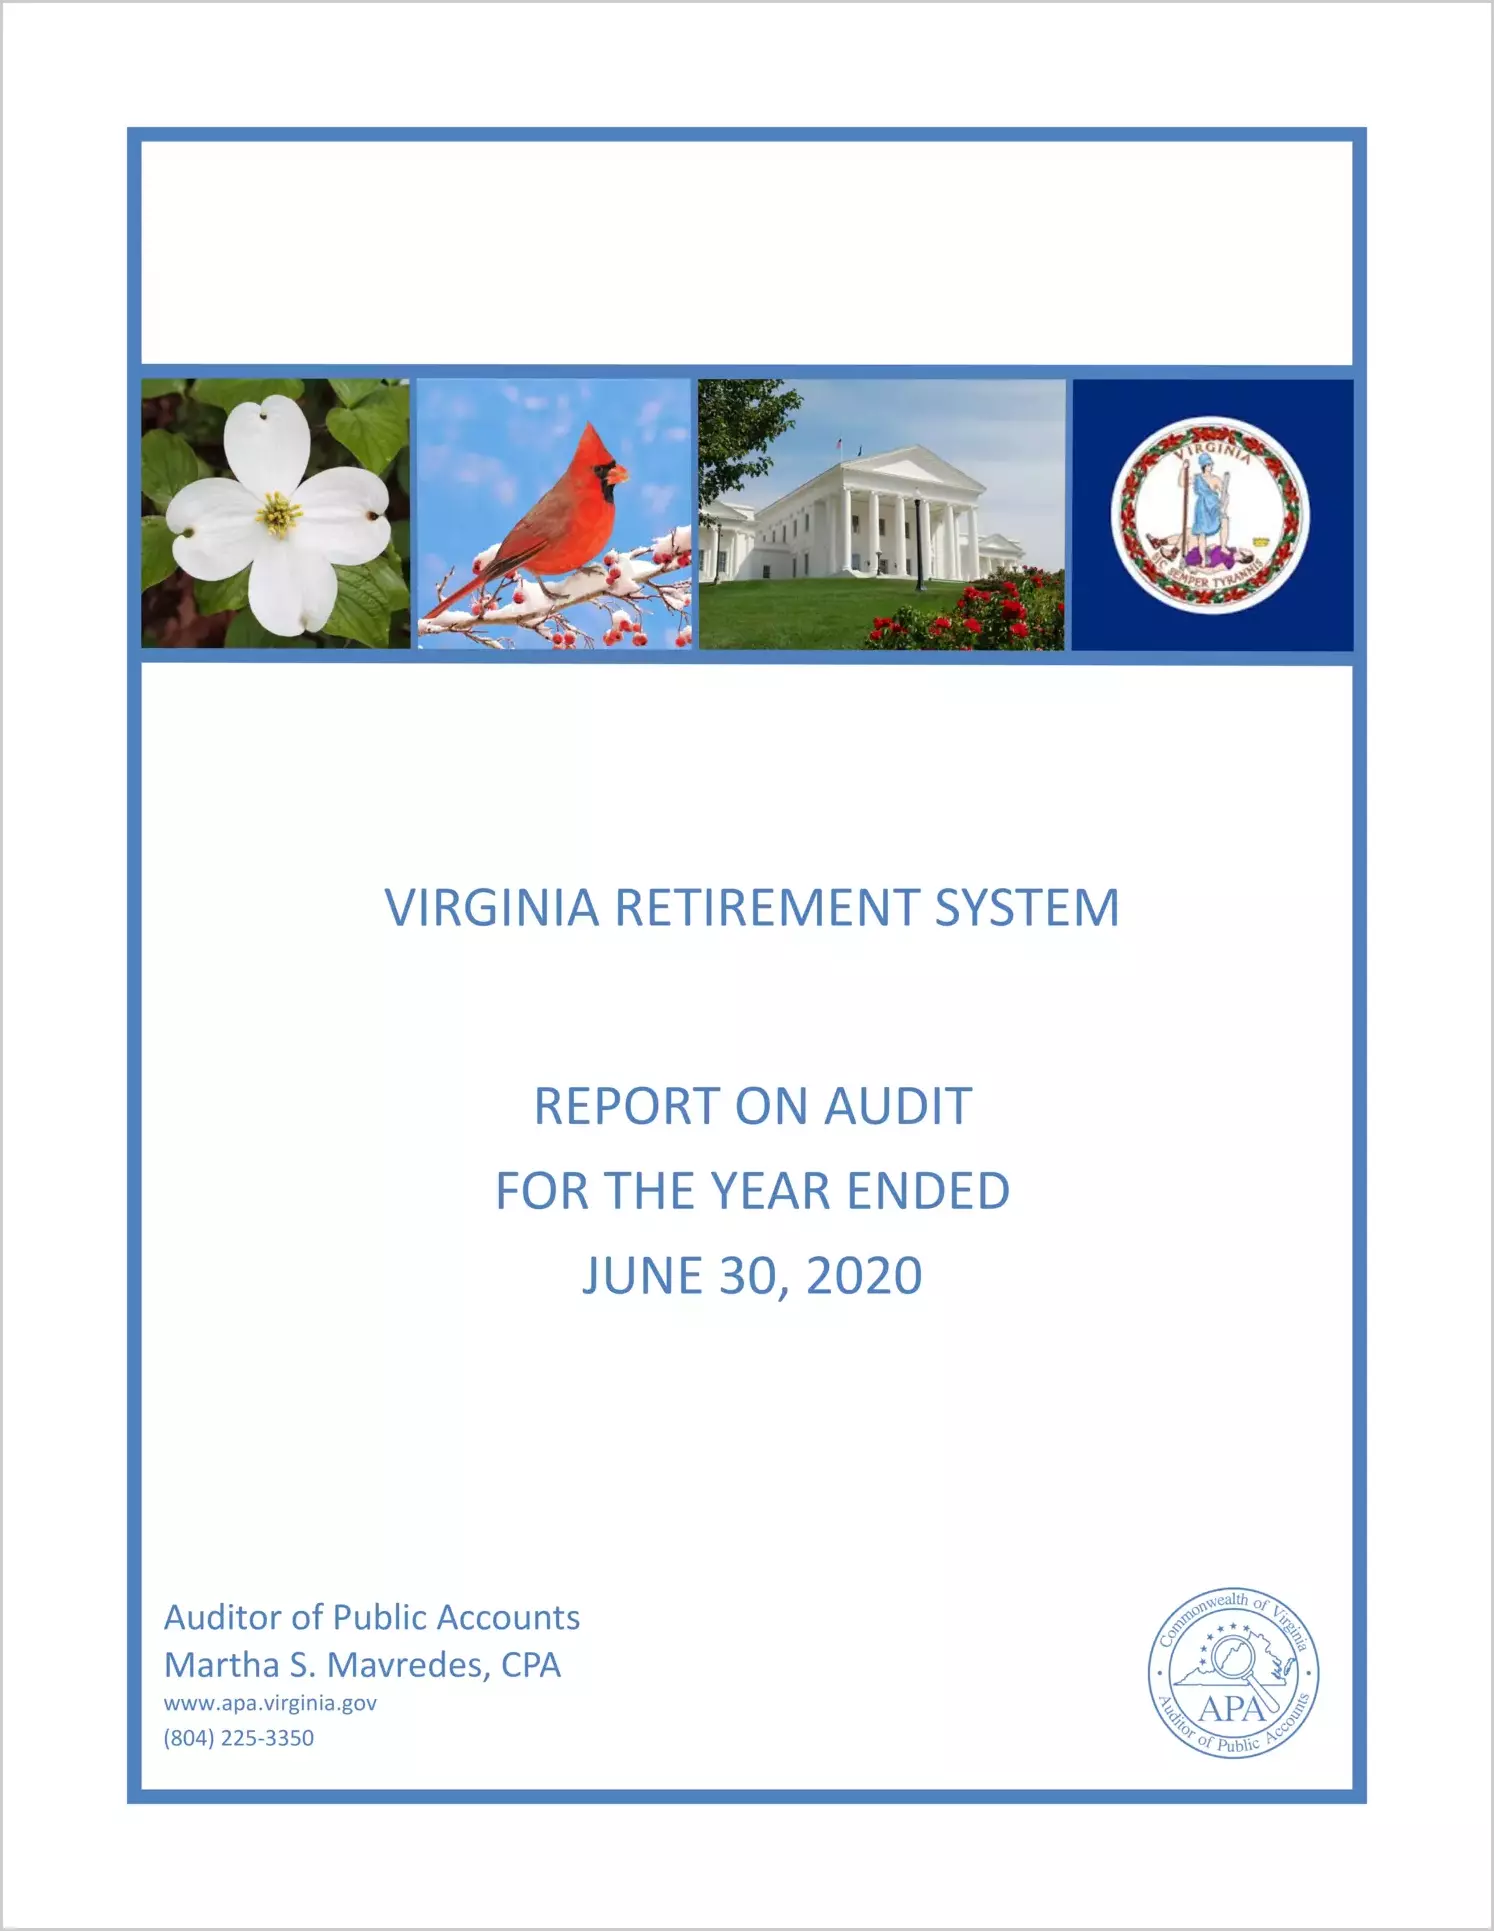 Virginia Retirement System for the year ended June 30, 2020